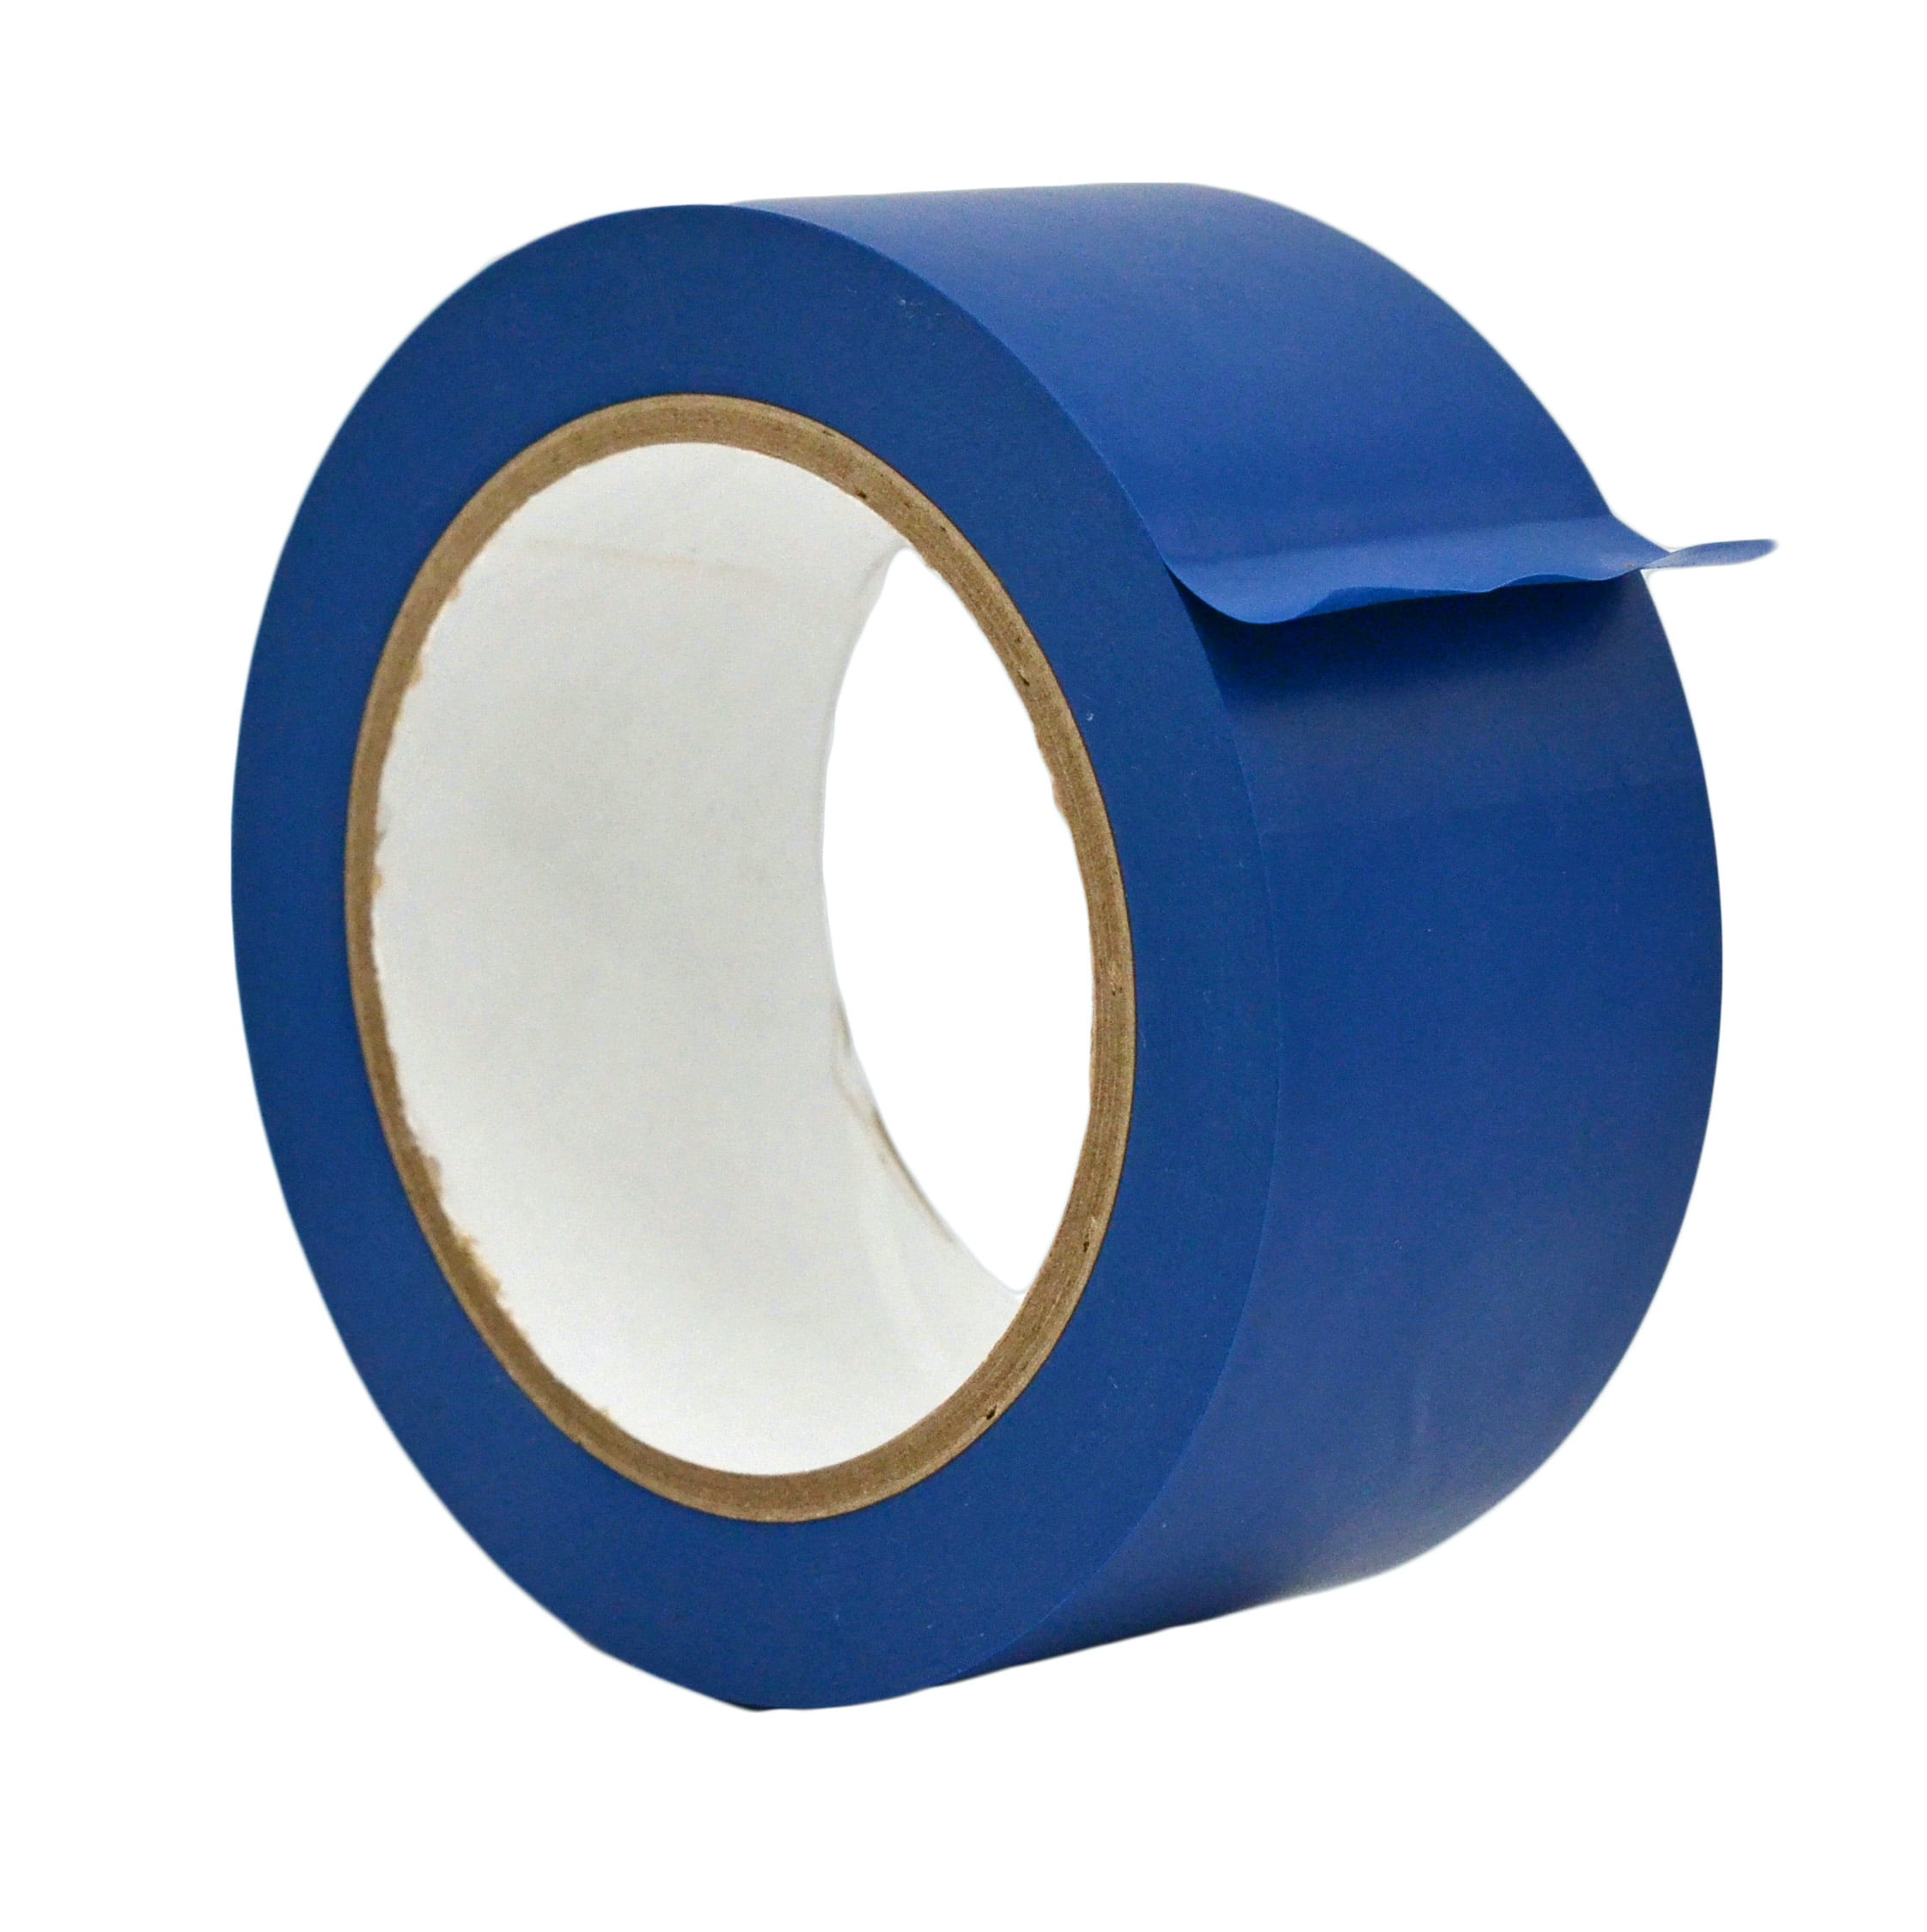 BLUE masking tape 60 yards USA also called draping tape or flagging tape 1/4" 